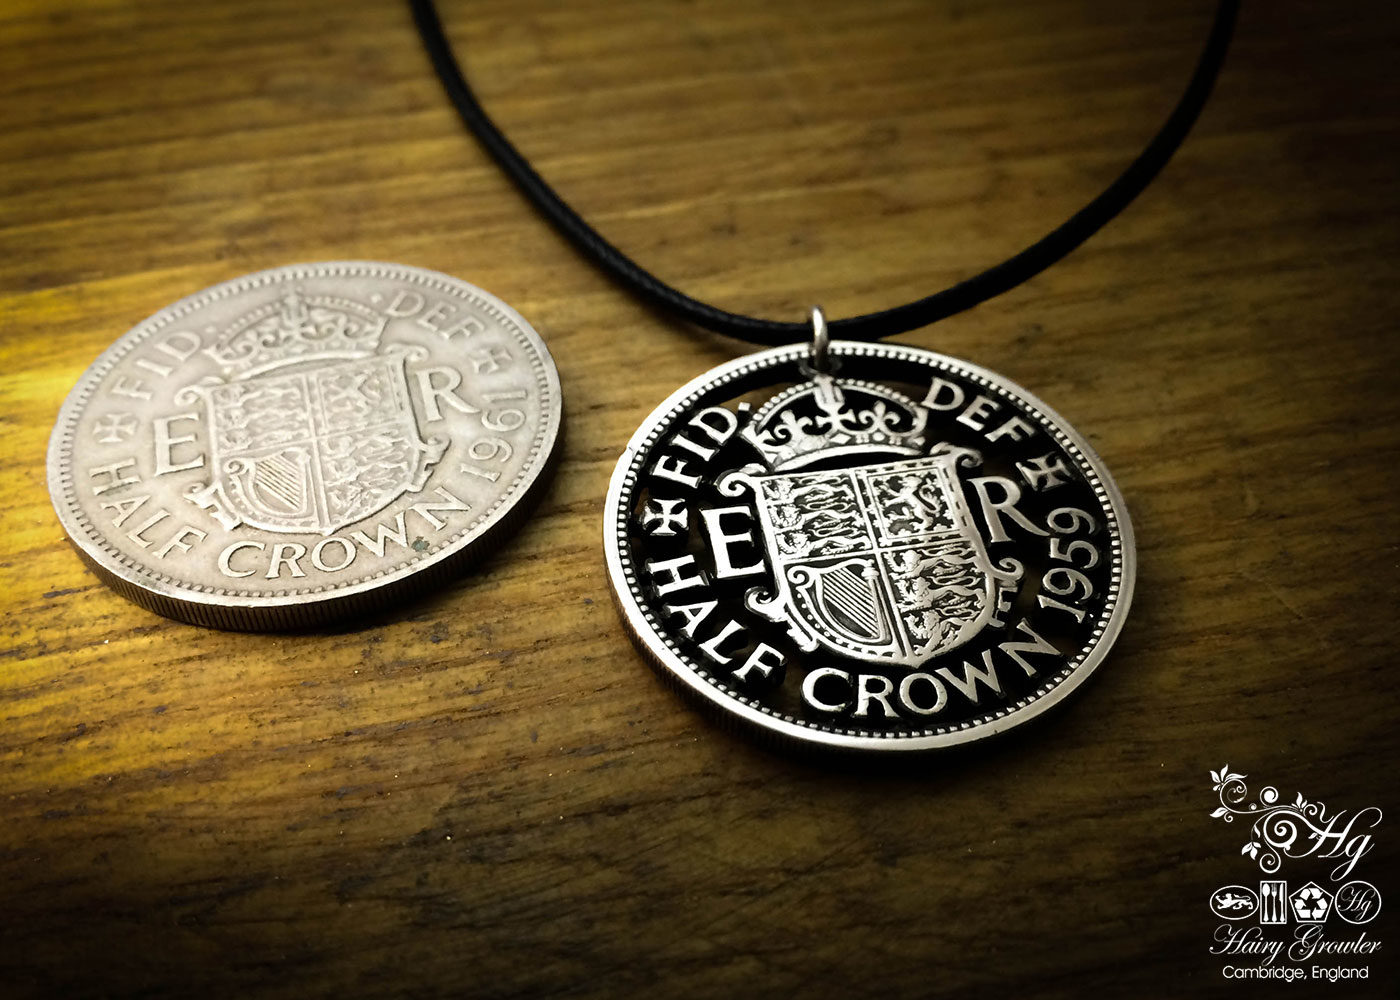 Handmade and upcycled half crown coin brooch or pendant